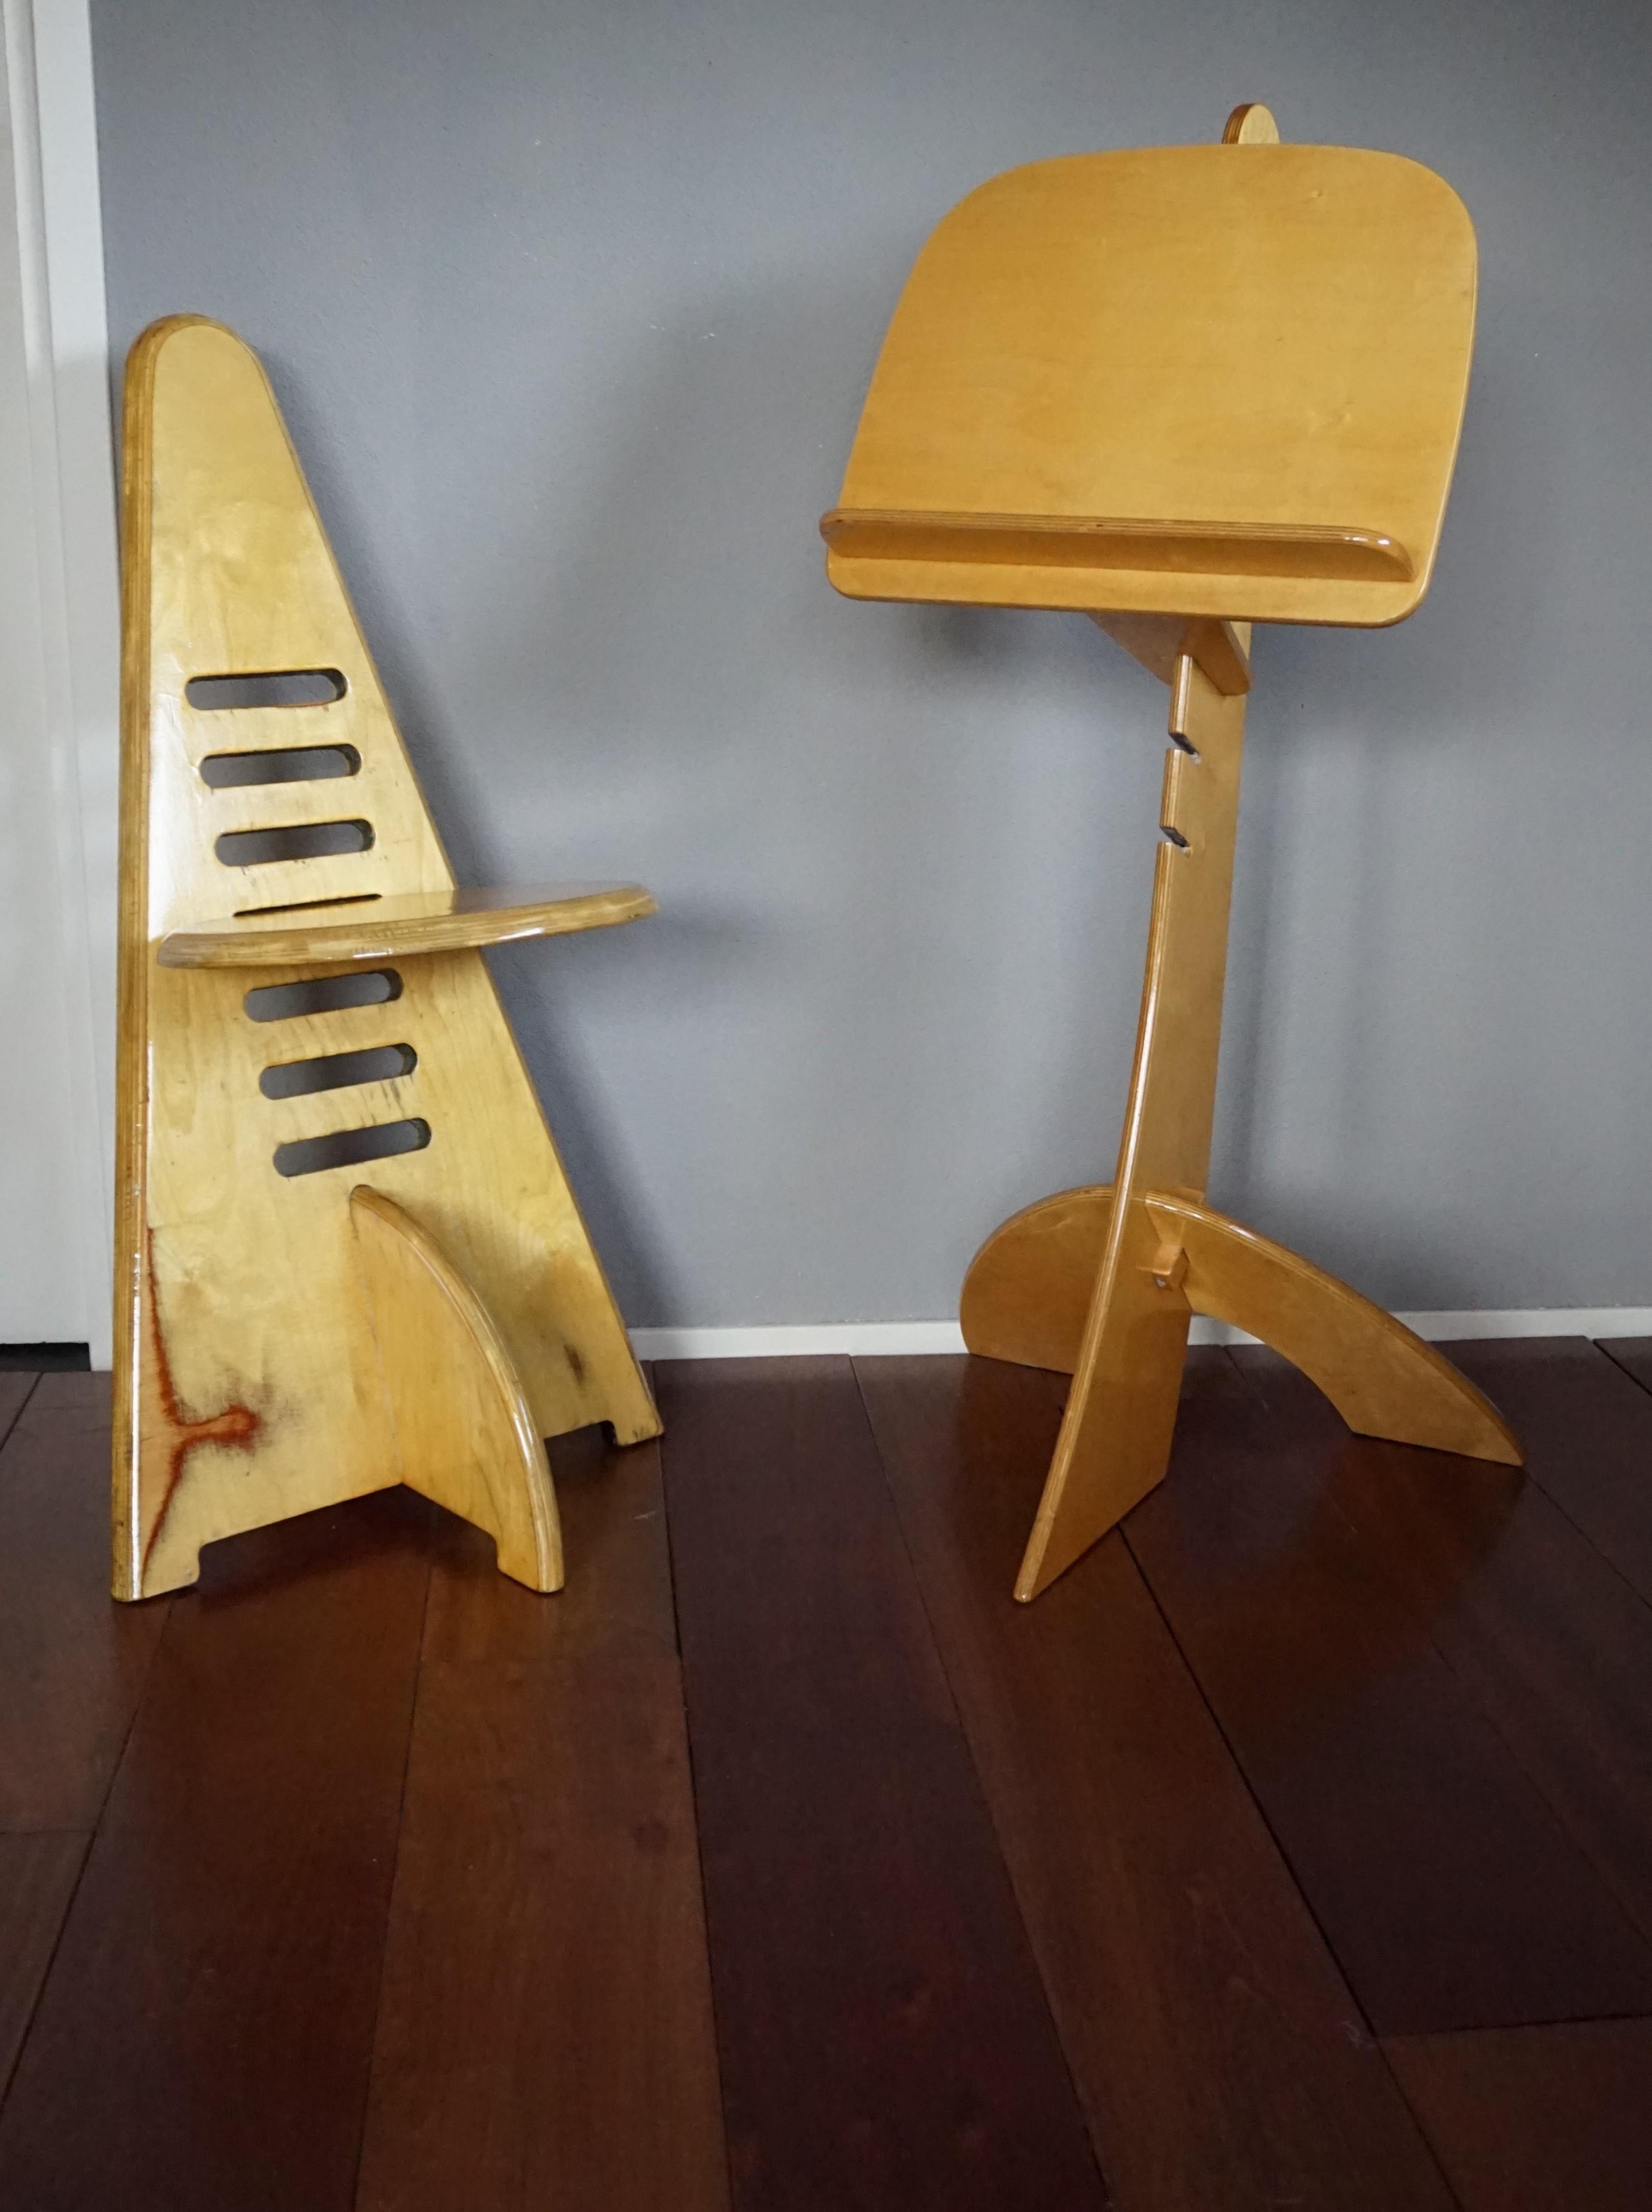 Rare Design & Height Adjustable Mid-Century Modern Plywood Music Chair and Stand 1